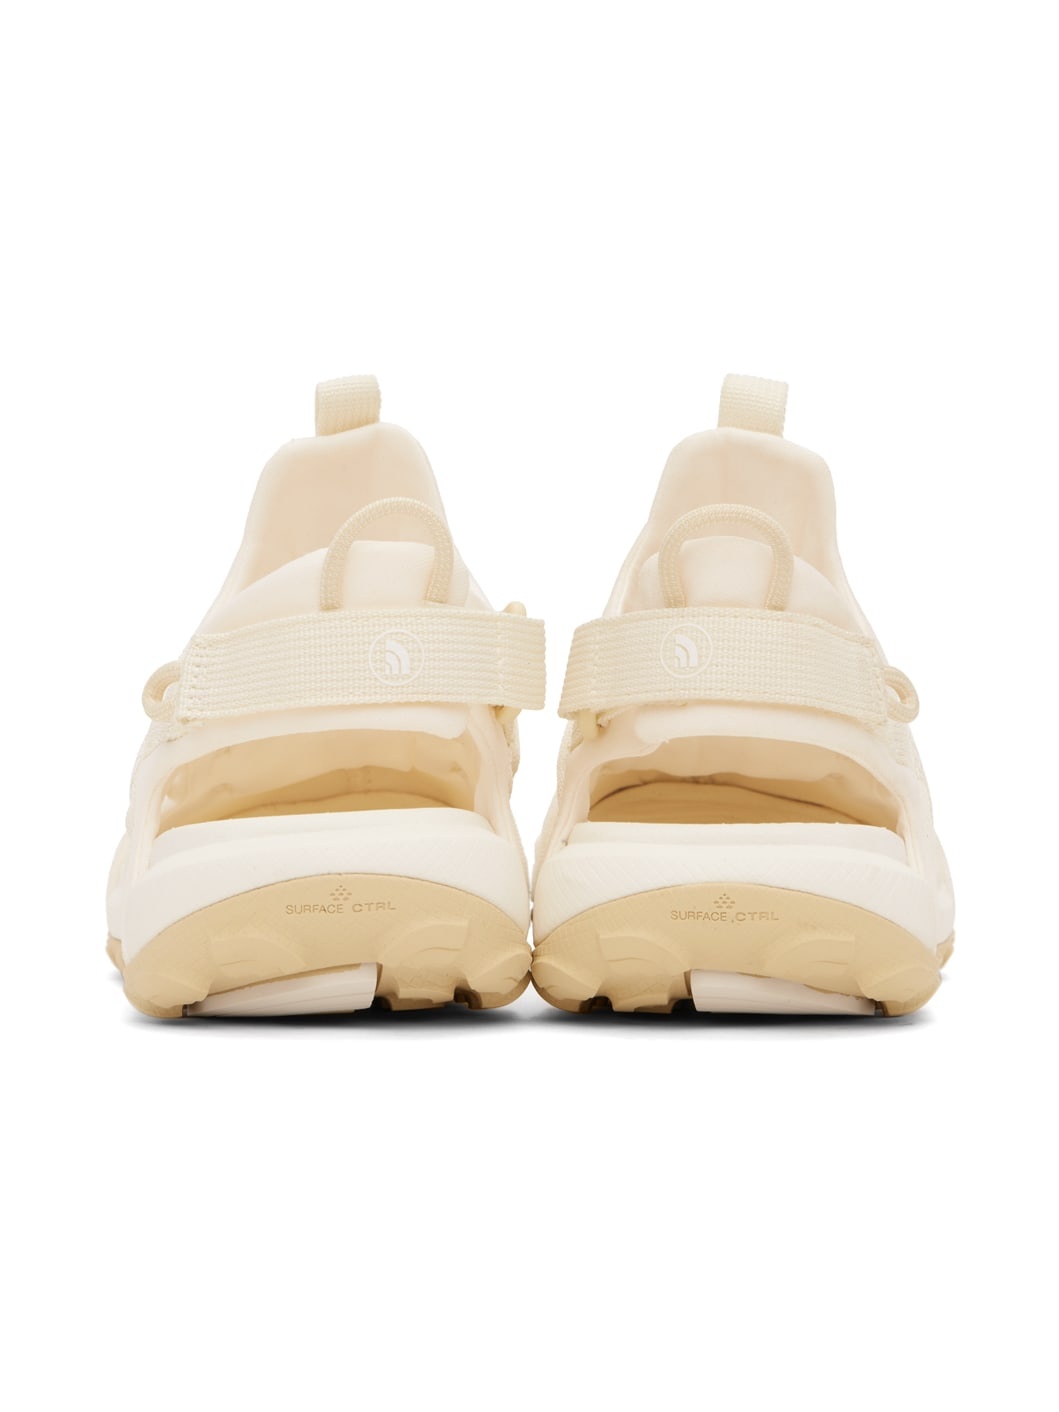 Off-White Explore Camp Sneakers - 2